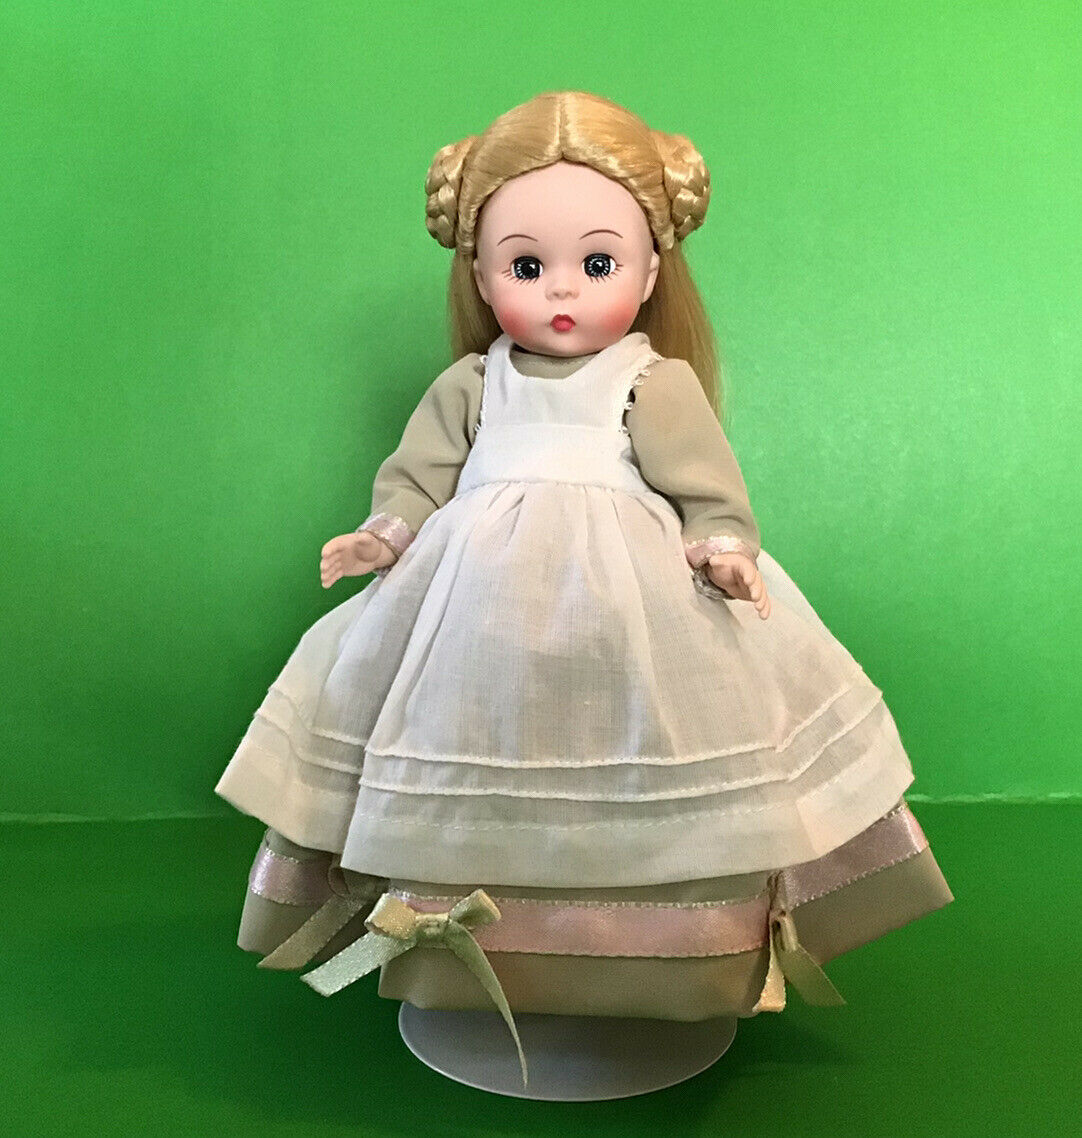 Madame Alexander Doll Little Women Amy, No Stand, No Box, No Handtag, Retired